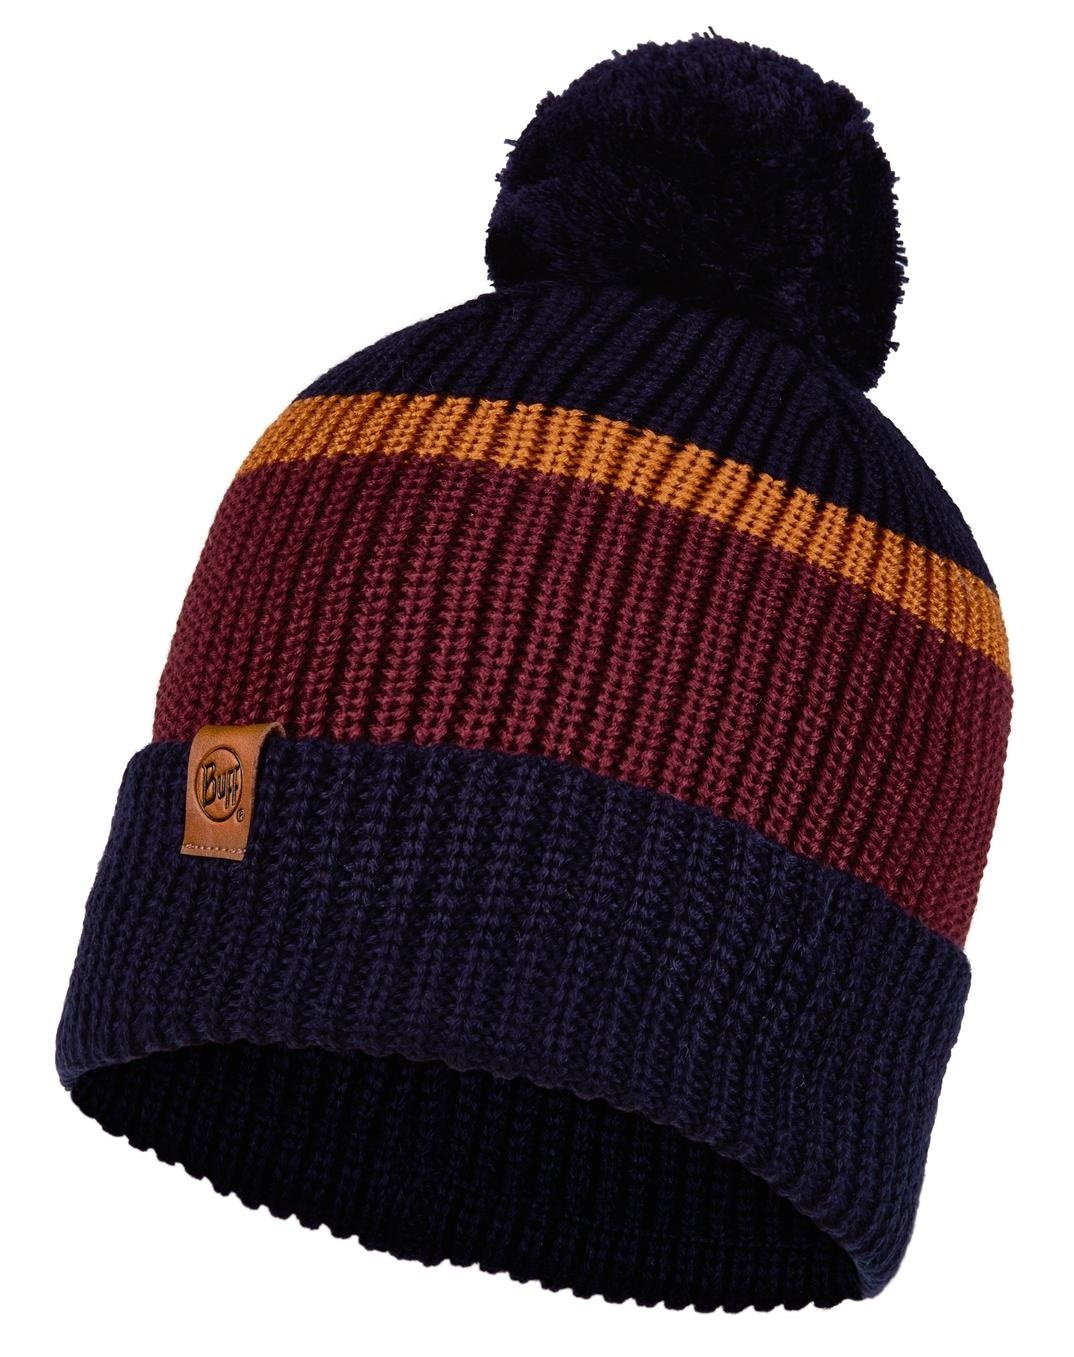 Шапка Buff Knitted Hat Elon Night Blue US:One size, 126464.779.10.00 шапка buff knitted hat elon maroon us one size 126464 632 10 00